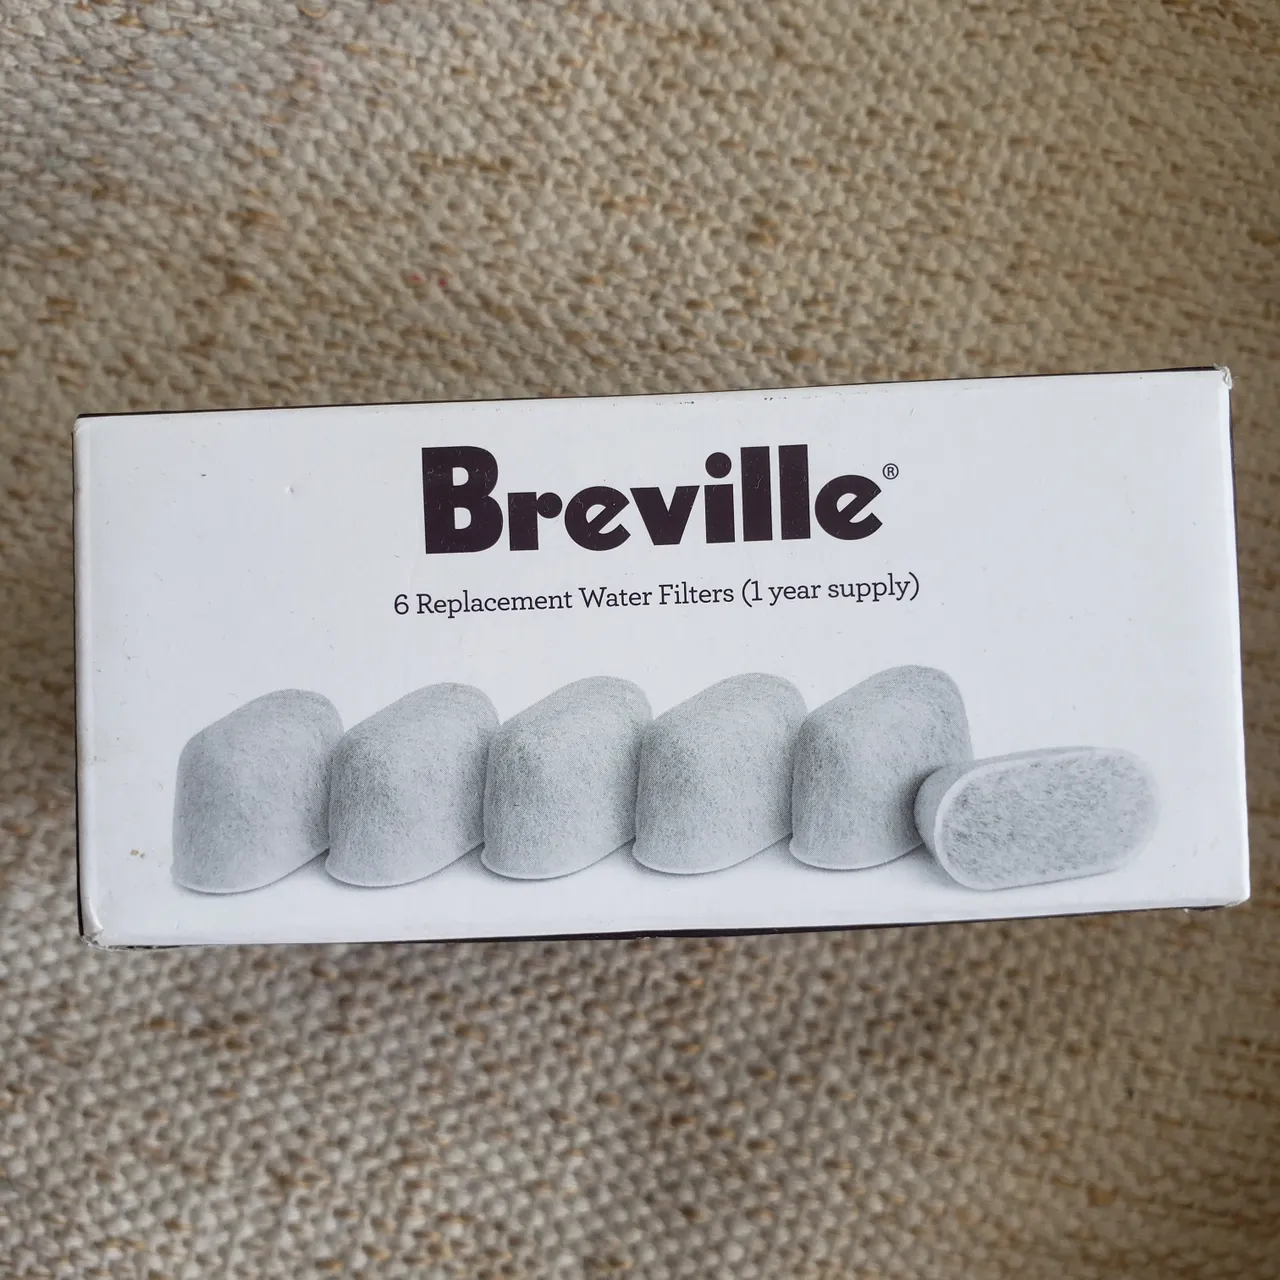 Breville replacement water filters photo 1